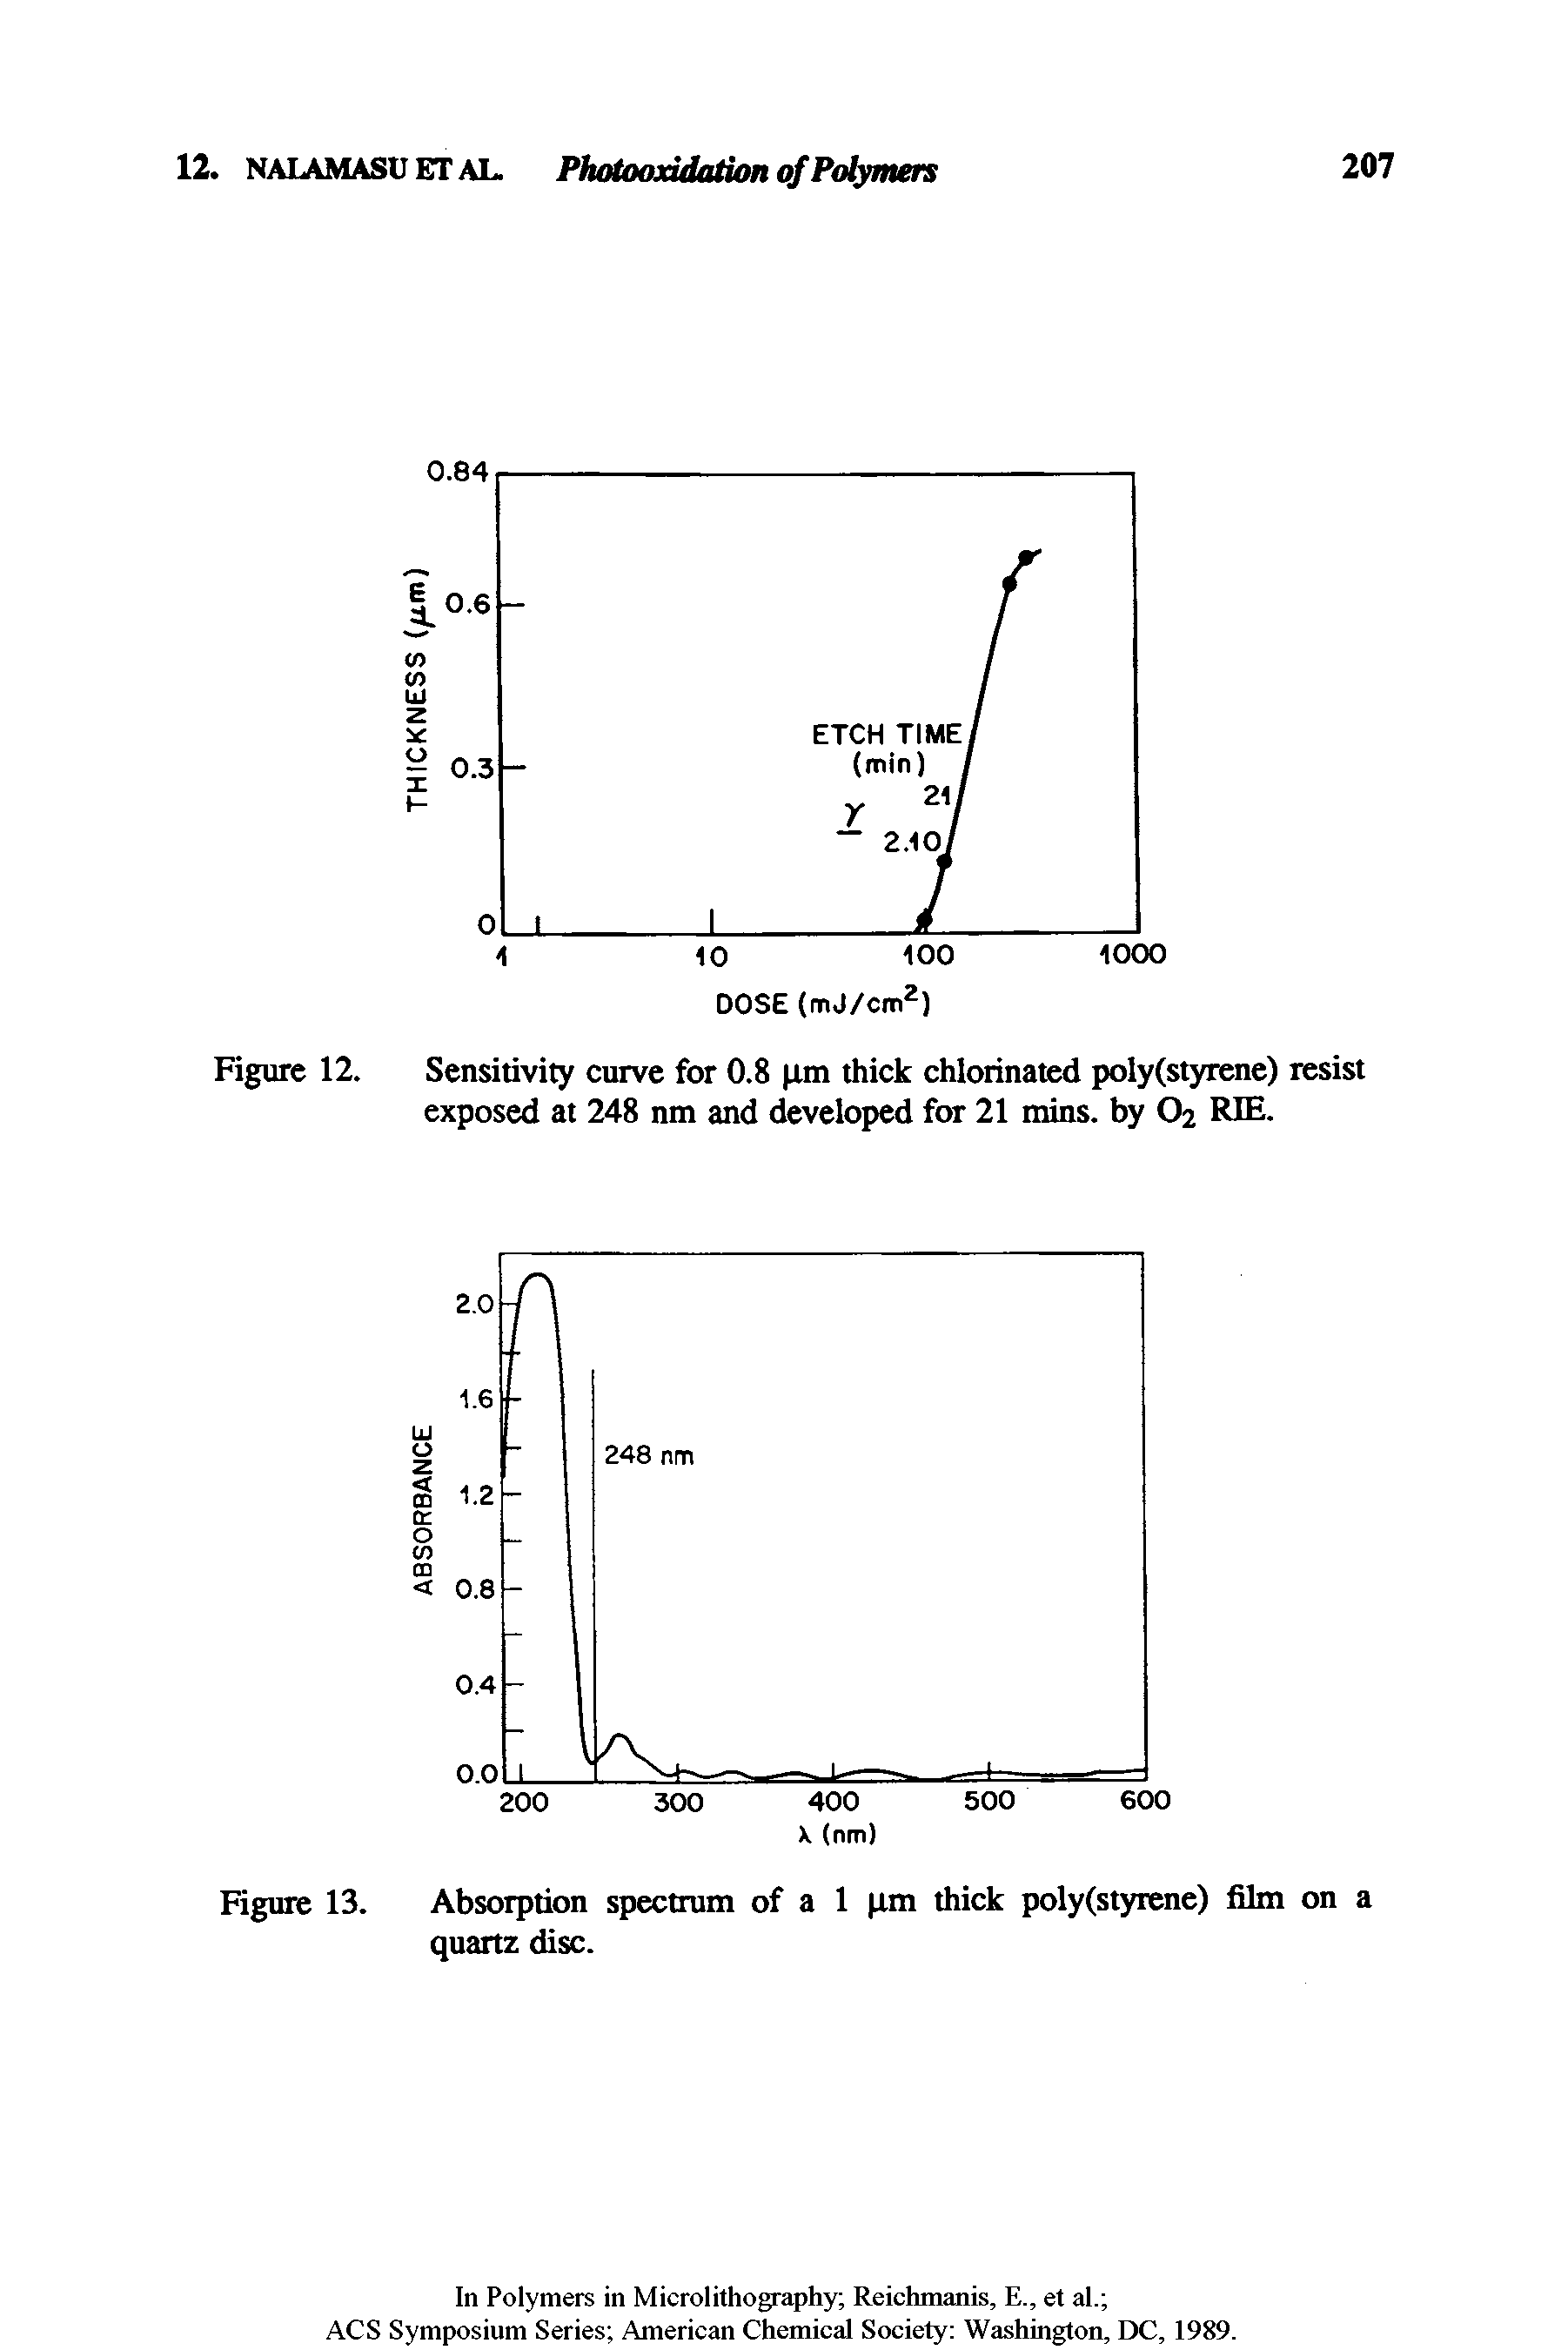 Figure 12. Sensitivity curve for 0.8 im thick chlorinated poly(styrene) resist exposed at 248 nm and developed for 21 mins, by O2 RIE.